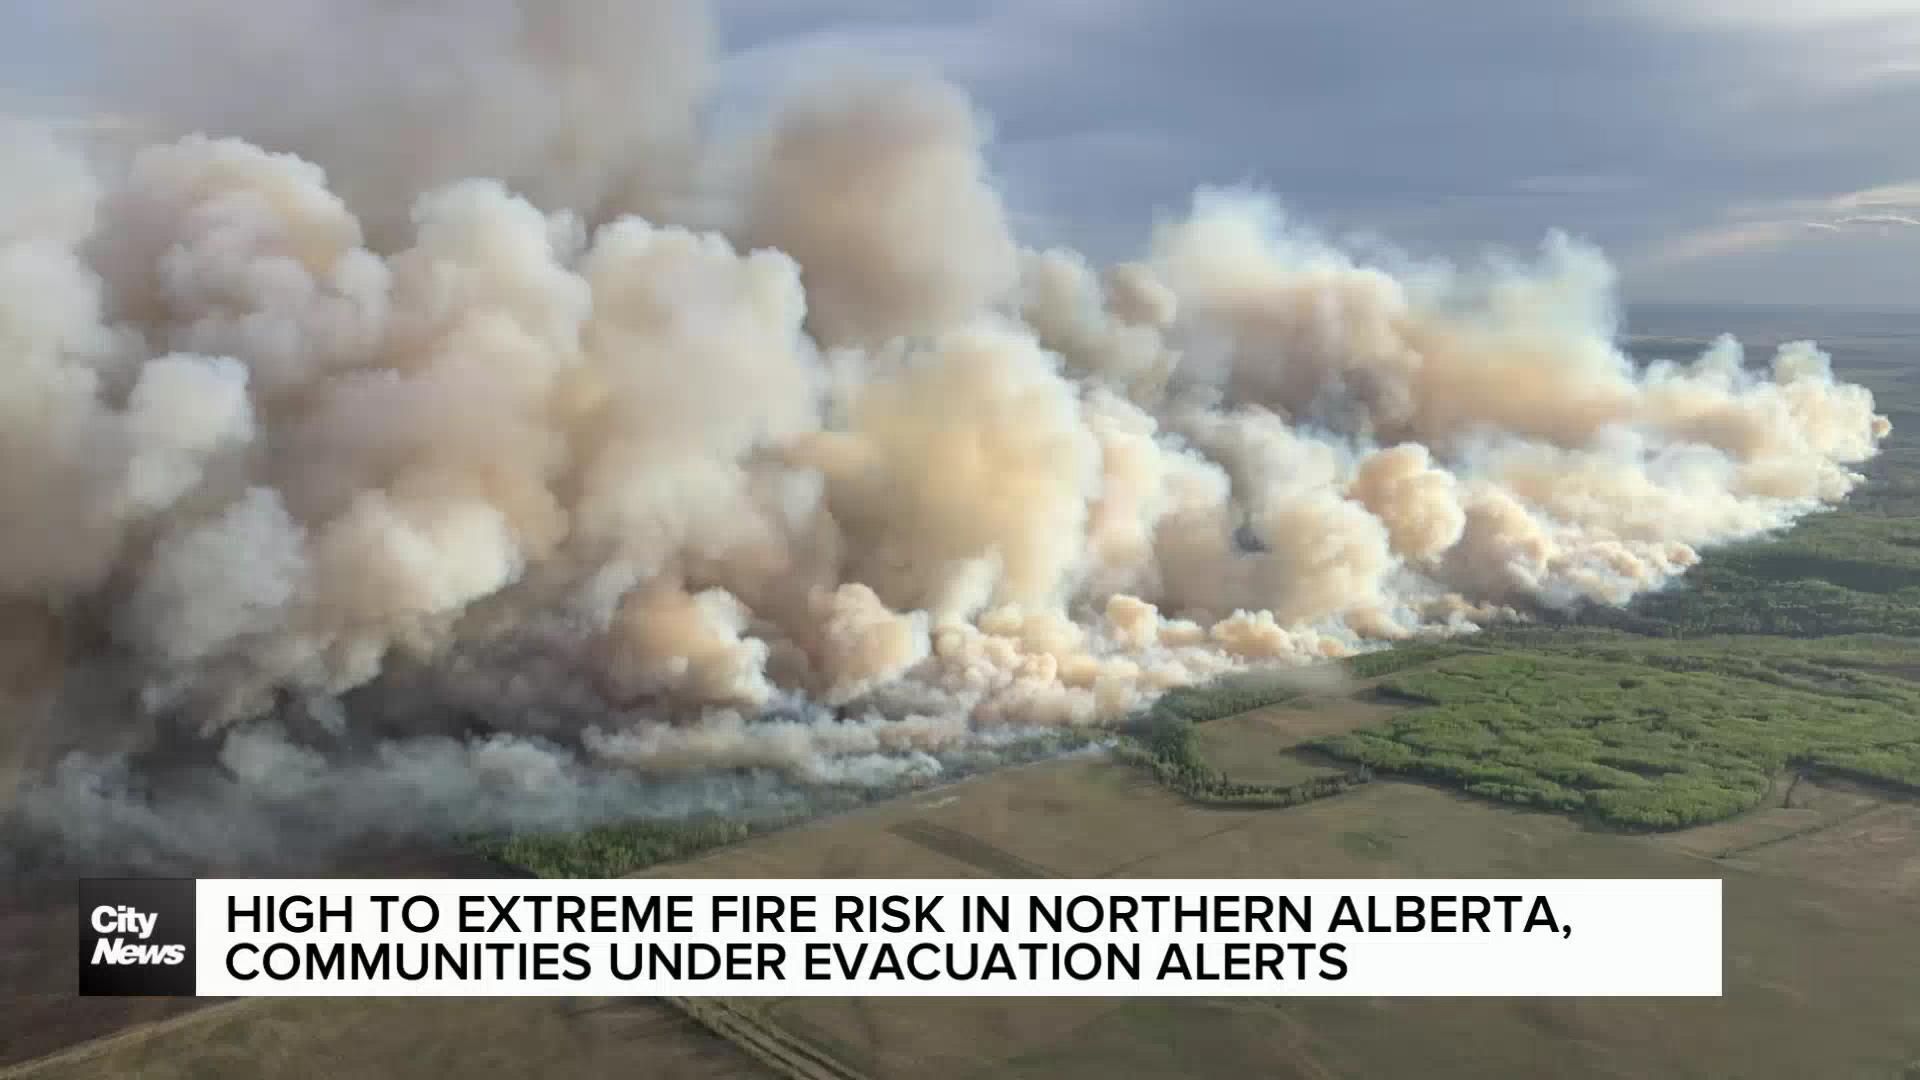 High to extreme fire risk in norther Alberta, communities under evacuation alerts